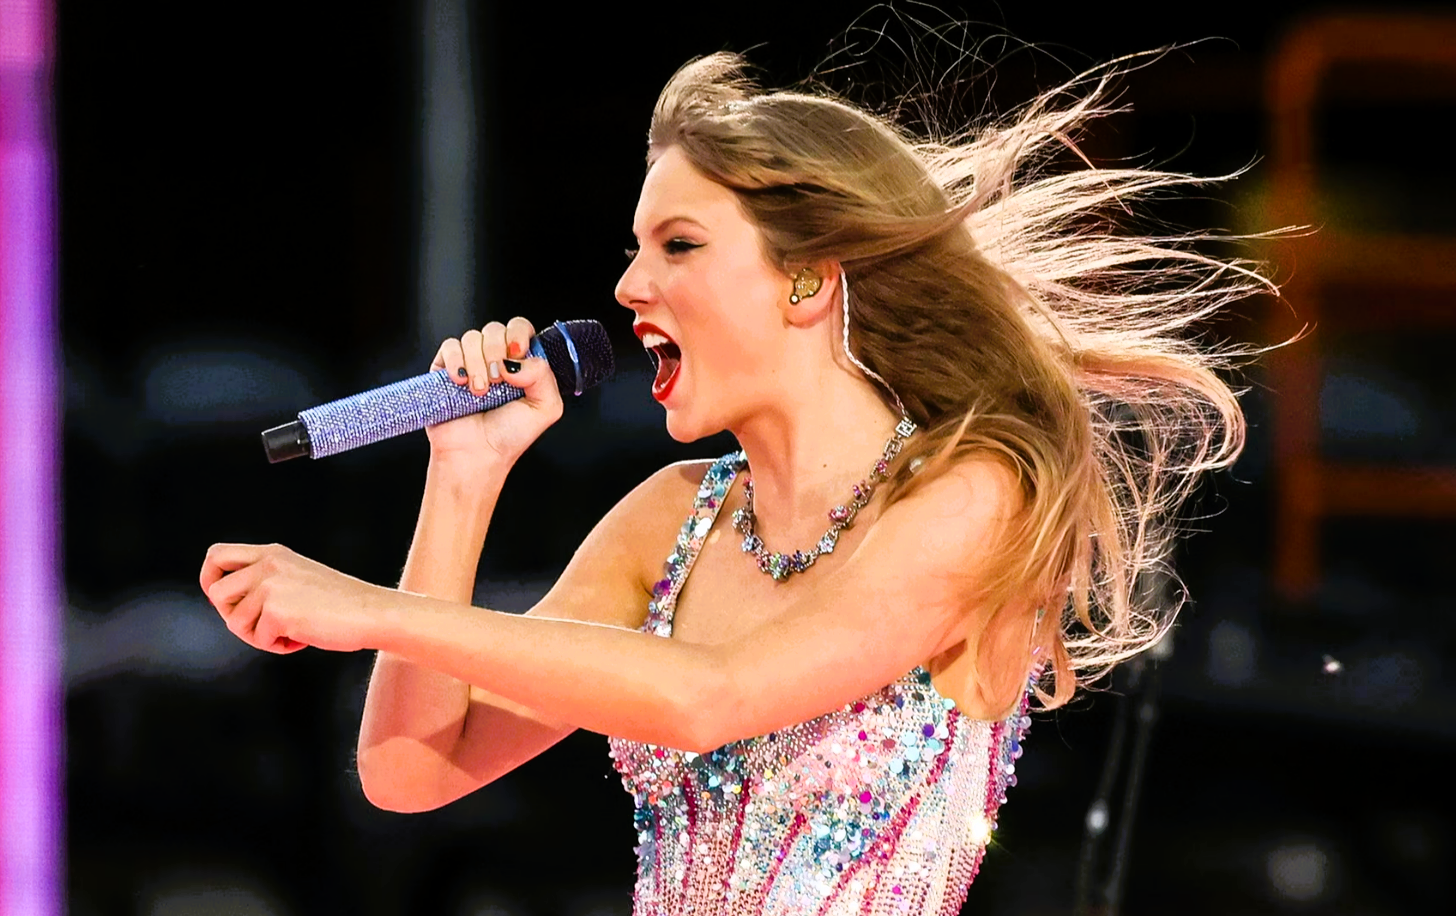 Taylor Swift Rumor Takes Off Online